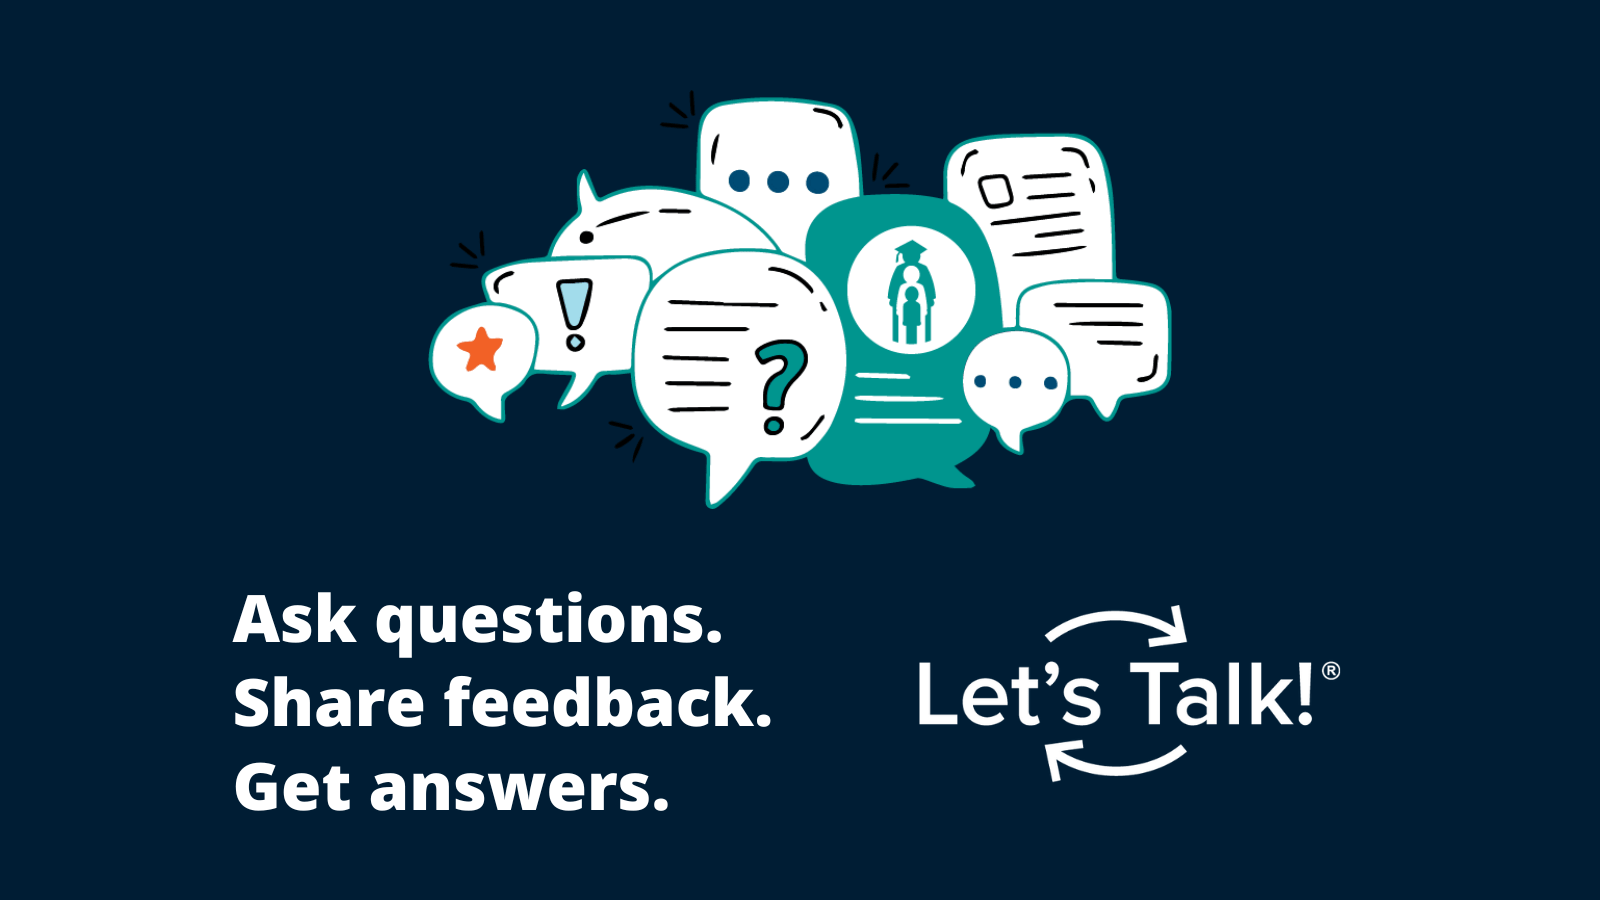 A collage of various speech bubbles appears above text that reads, "Ask questions. Share feedback. Get answers. Let's Talk. Image sized for Twitter.